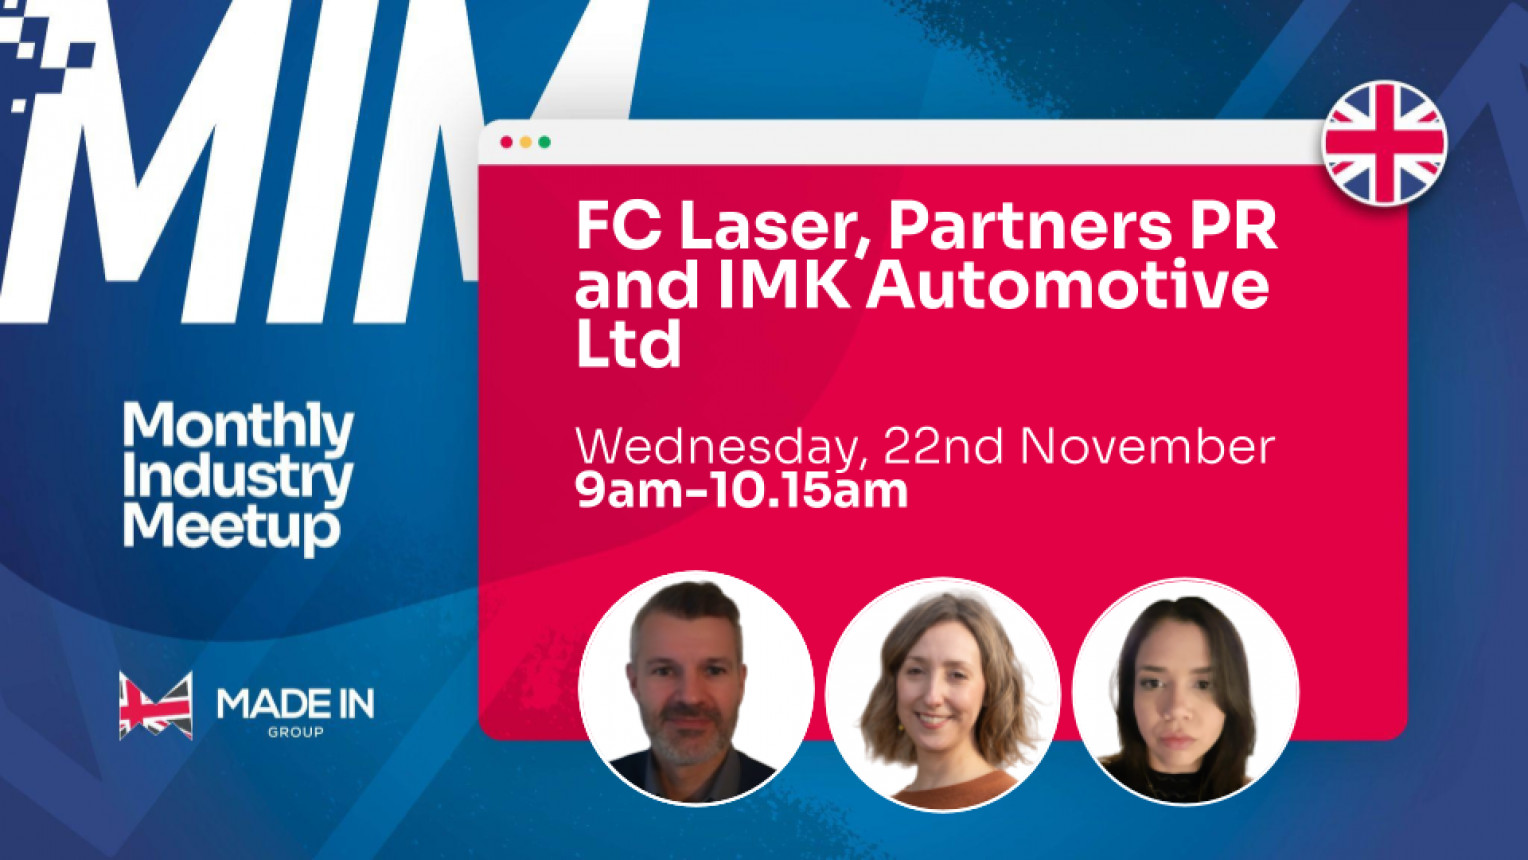 Monthly Industry Meetup with FC Laser, Partners PR & IMK Automotive Ltd